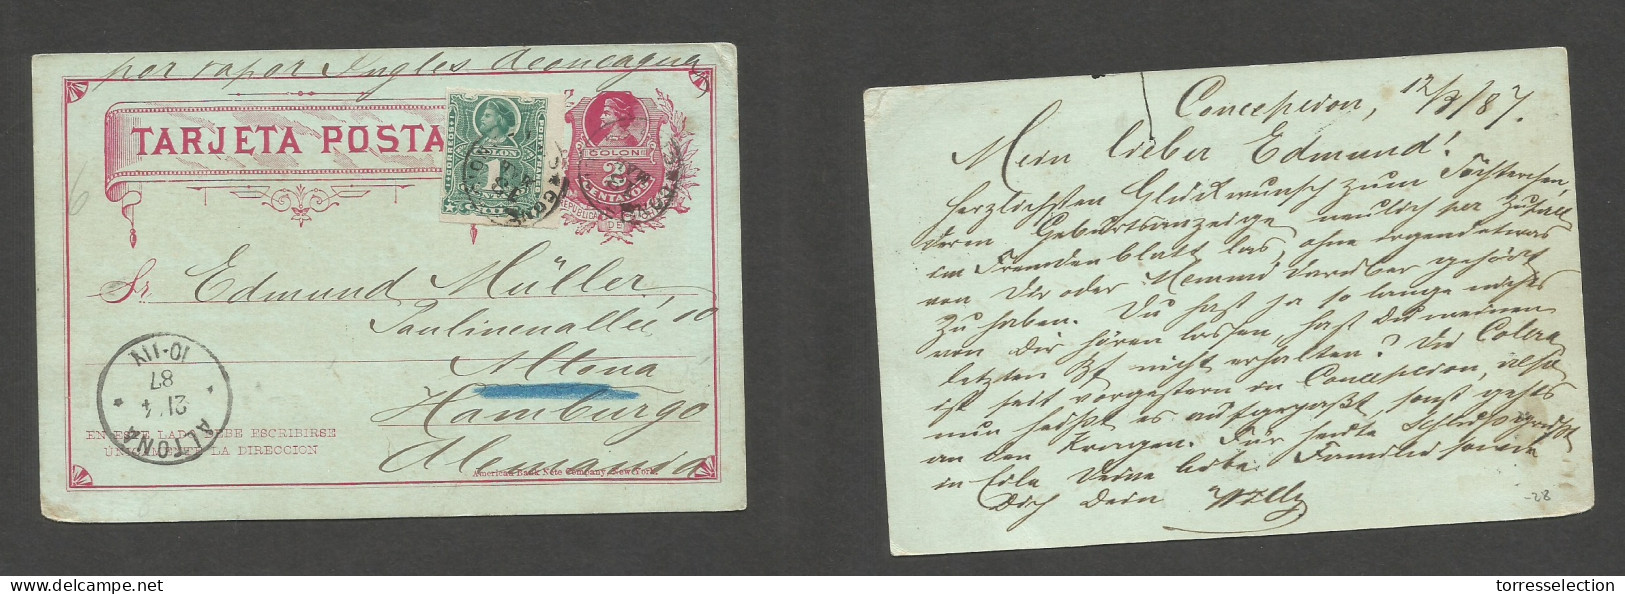 CHILE - Stationery. 1887 (12 March) Concepcion - Germany, Hamburg (21 Apr) 2c Red Stat Card + 1c Green Perce Adtl, Tied  - Chile